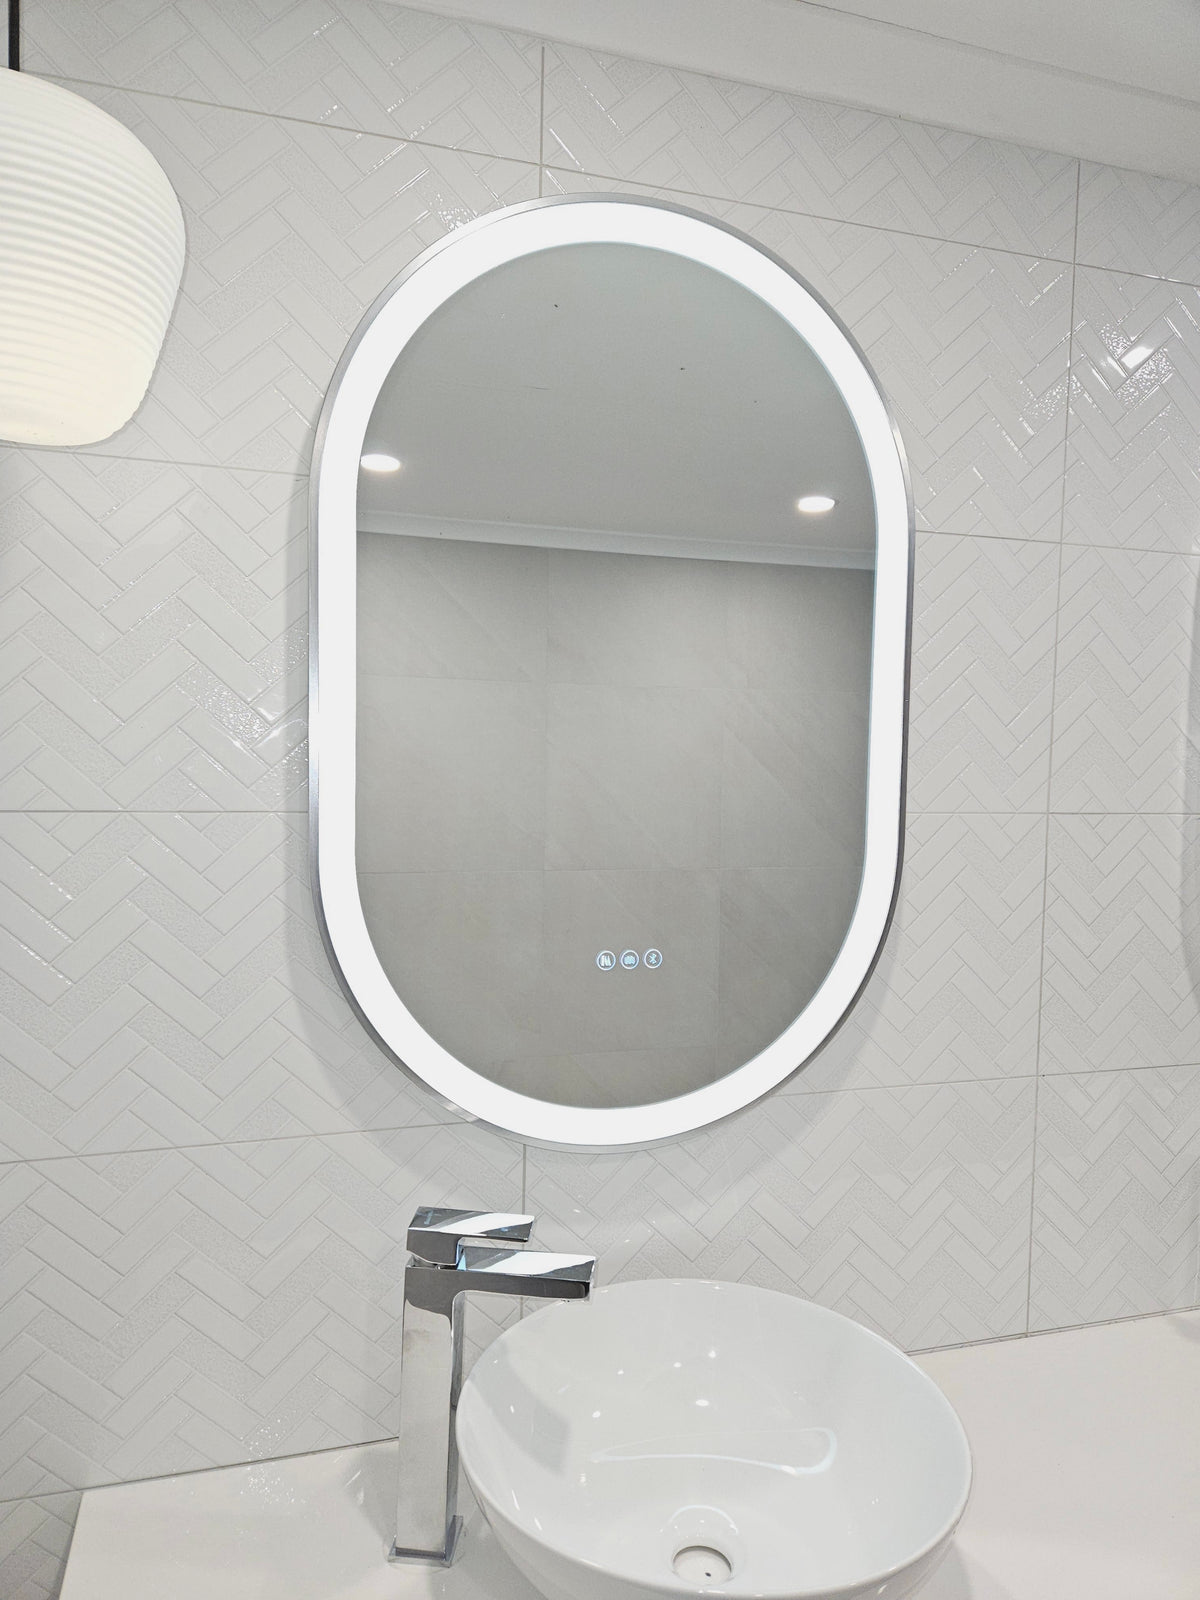 Stylish Silver Frame Pill-Shaped Smart Mirror with Front LED Lights in White Bathroom